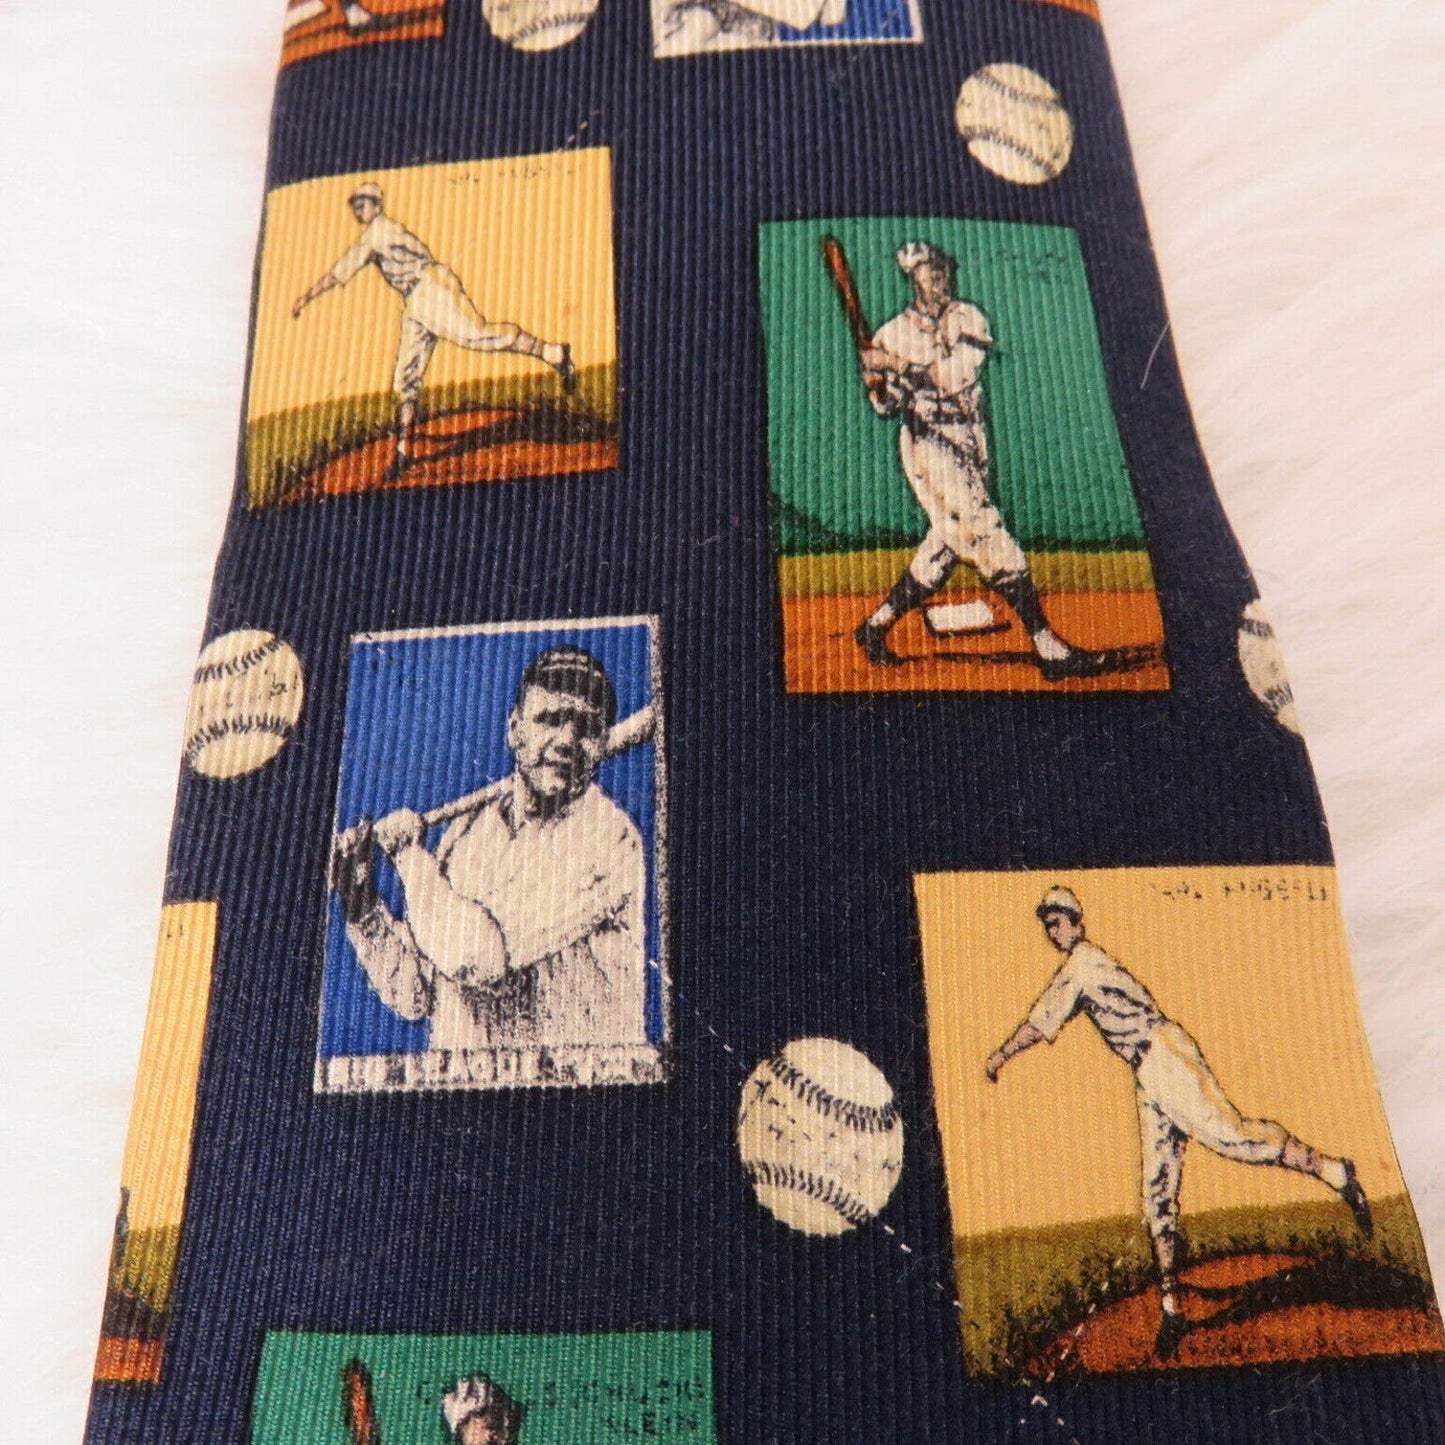 Vintage Nautica Silk Old Timey Baseball Tie Made in USA